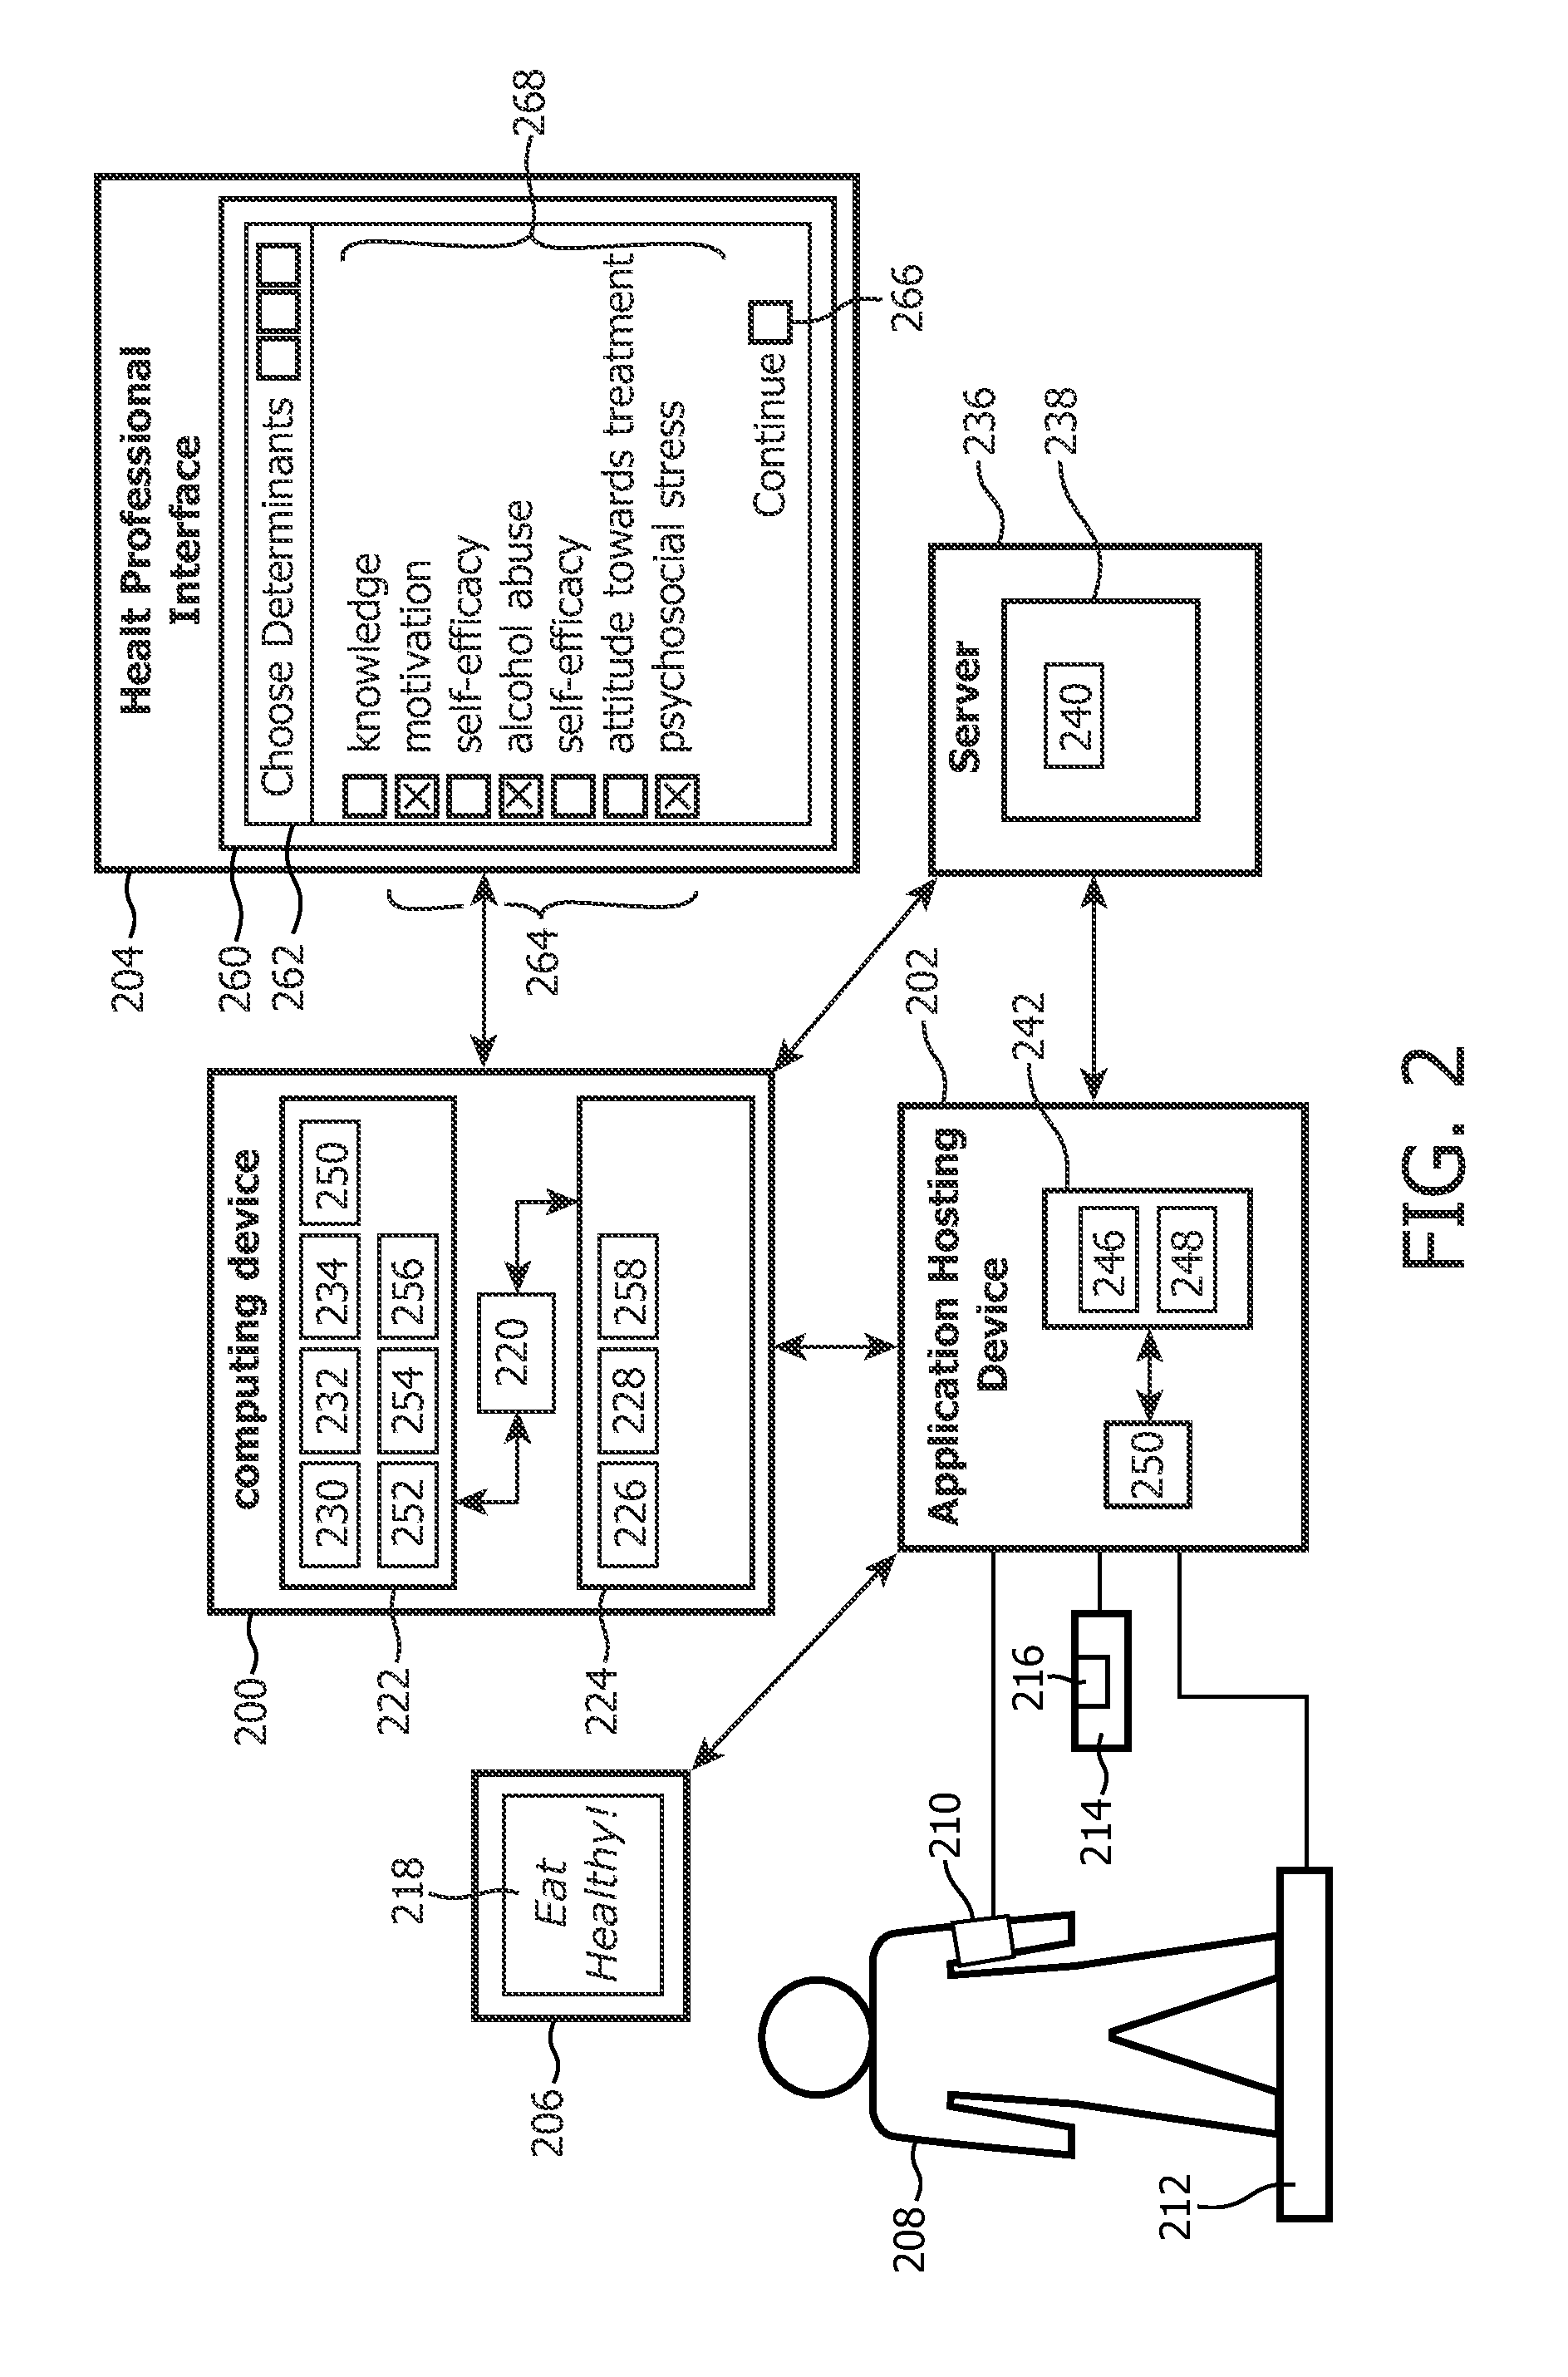 Computer-implemented method of manufacturing a computer-readable storage medium for a remote patient management system